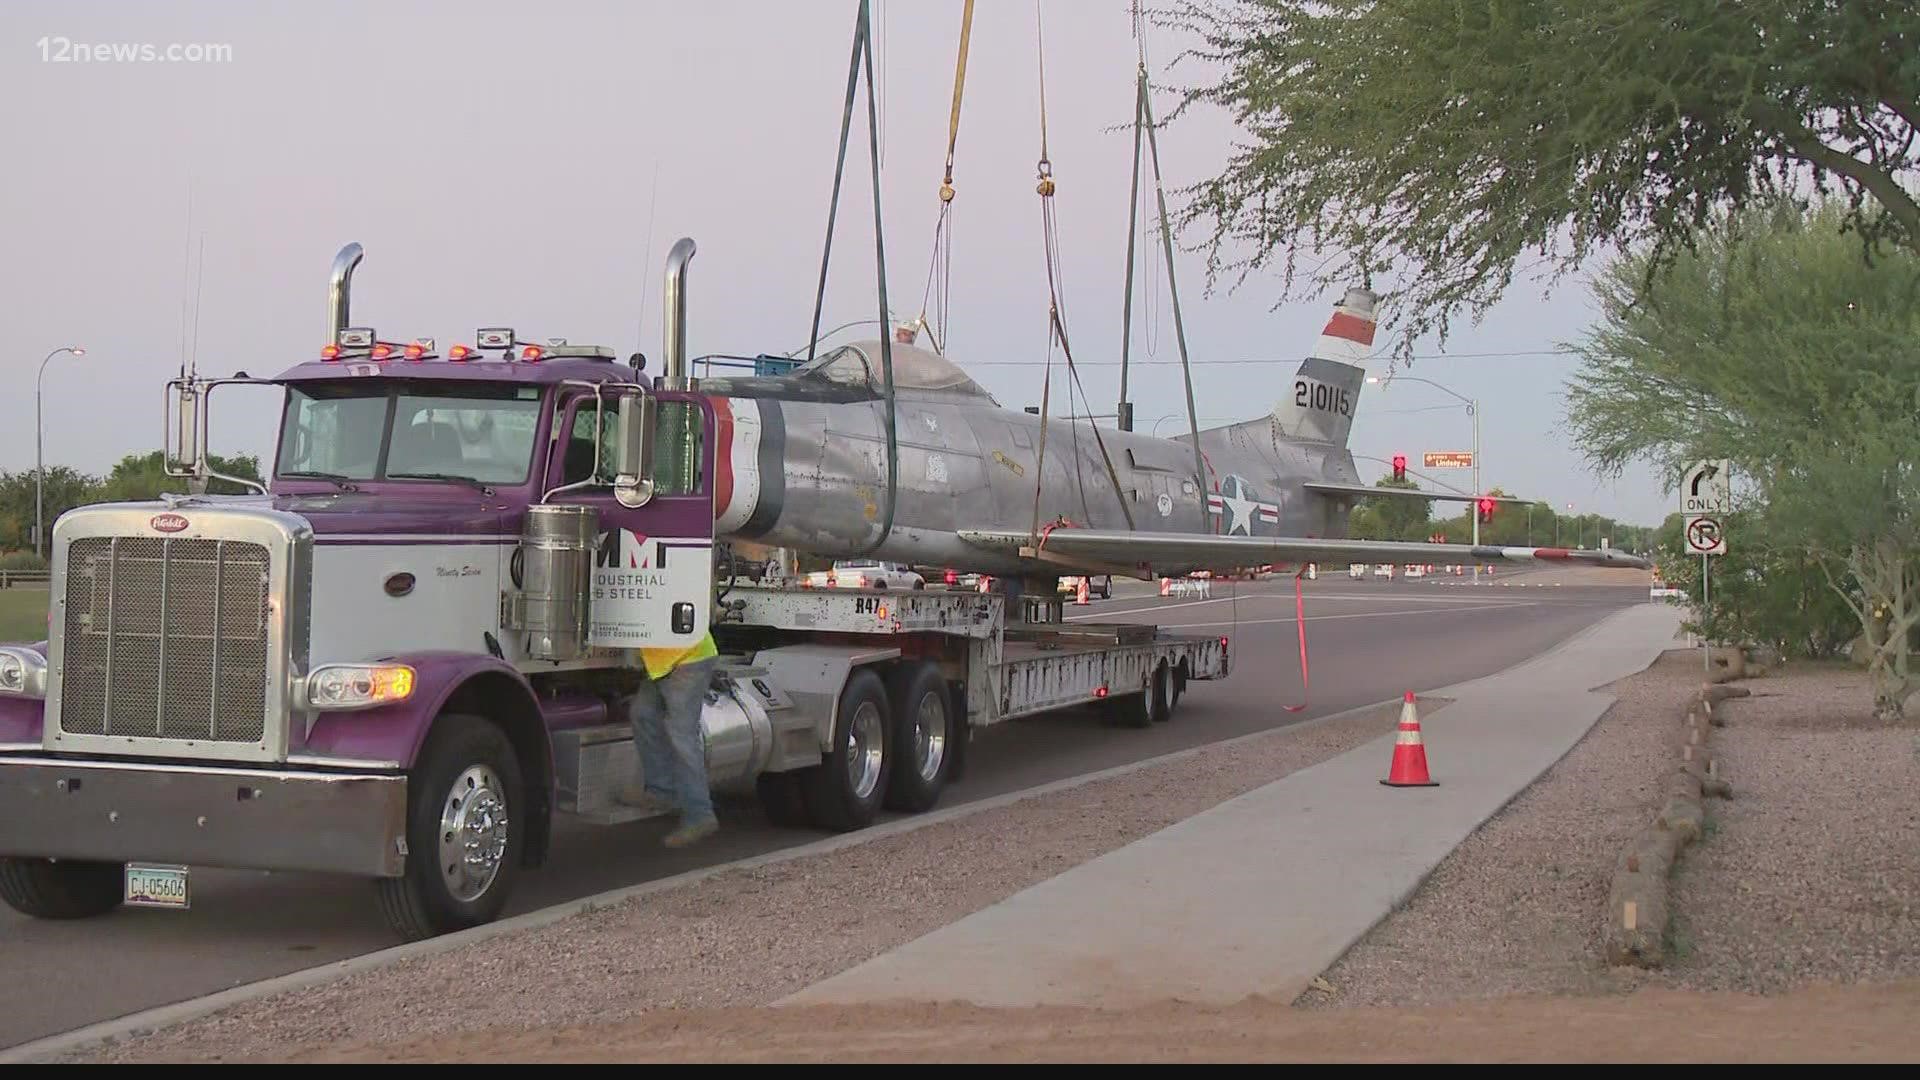 The plane will move from its previous home at Delaware Street and Chandler Boulevard and will be heading to Field of Honor at Veterans Oasis Park, officials said.